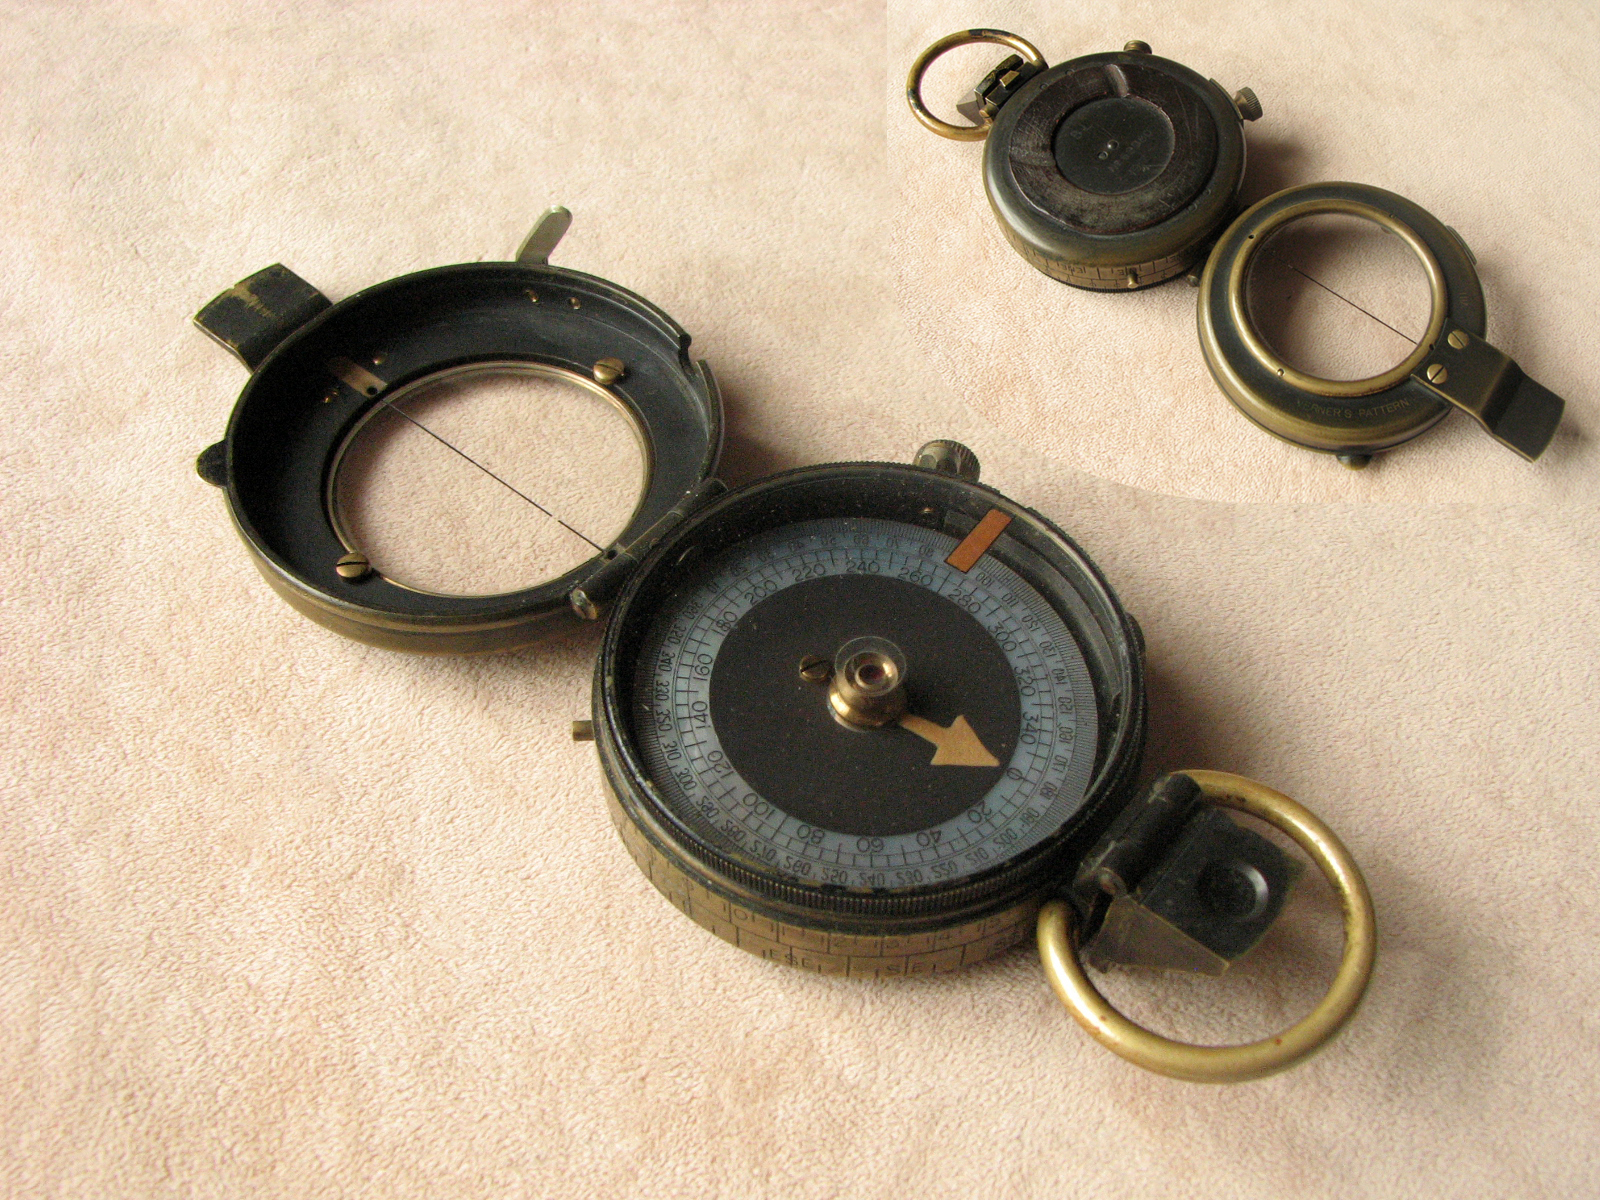 Bausch & Lomb WW1 Verners MK VIII prismatic marching compasses